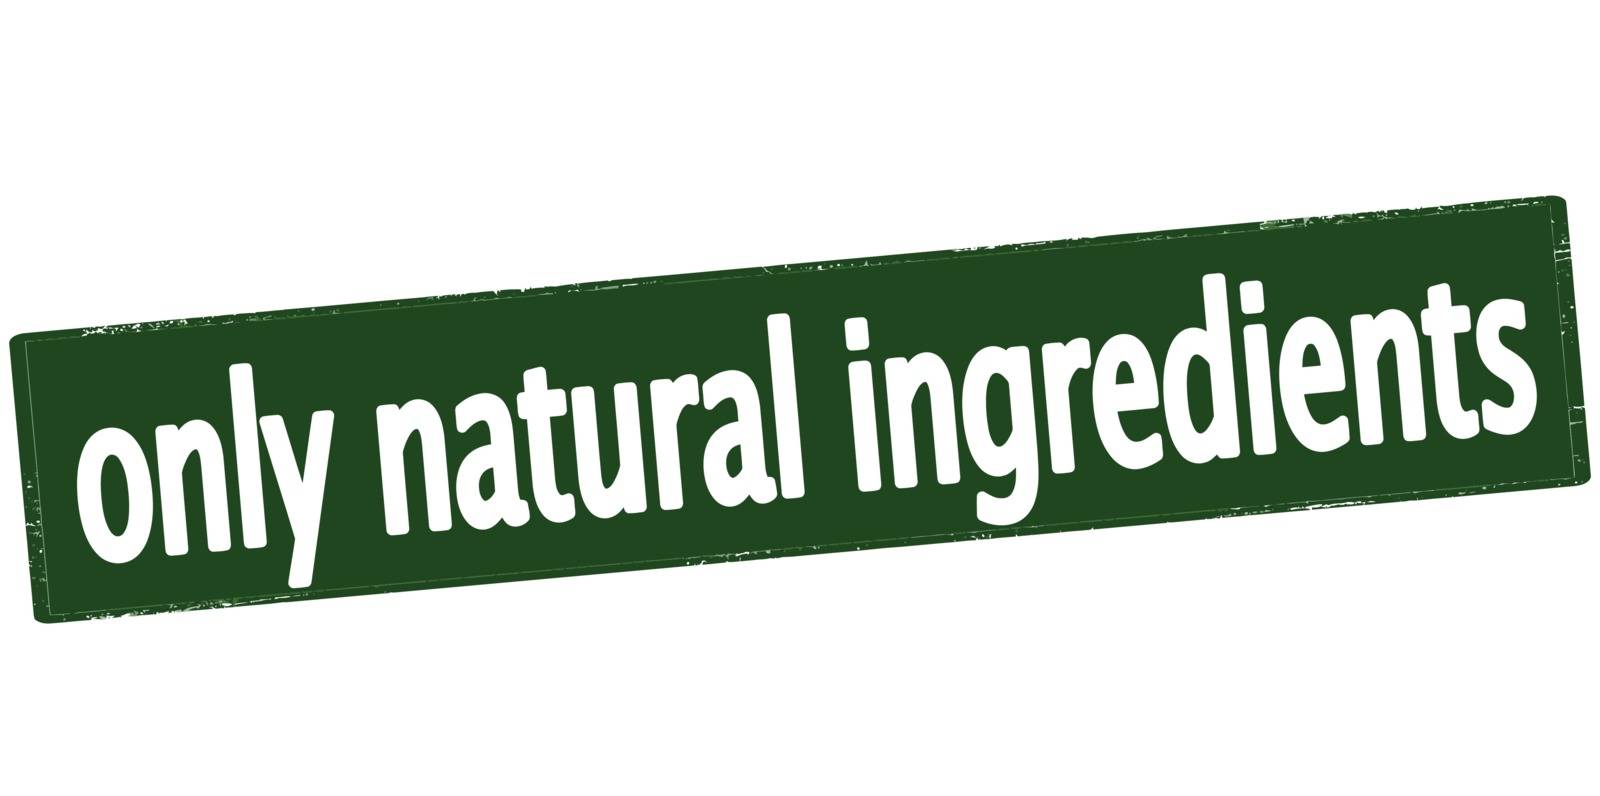 Only natural ingredients by carmenbobo